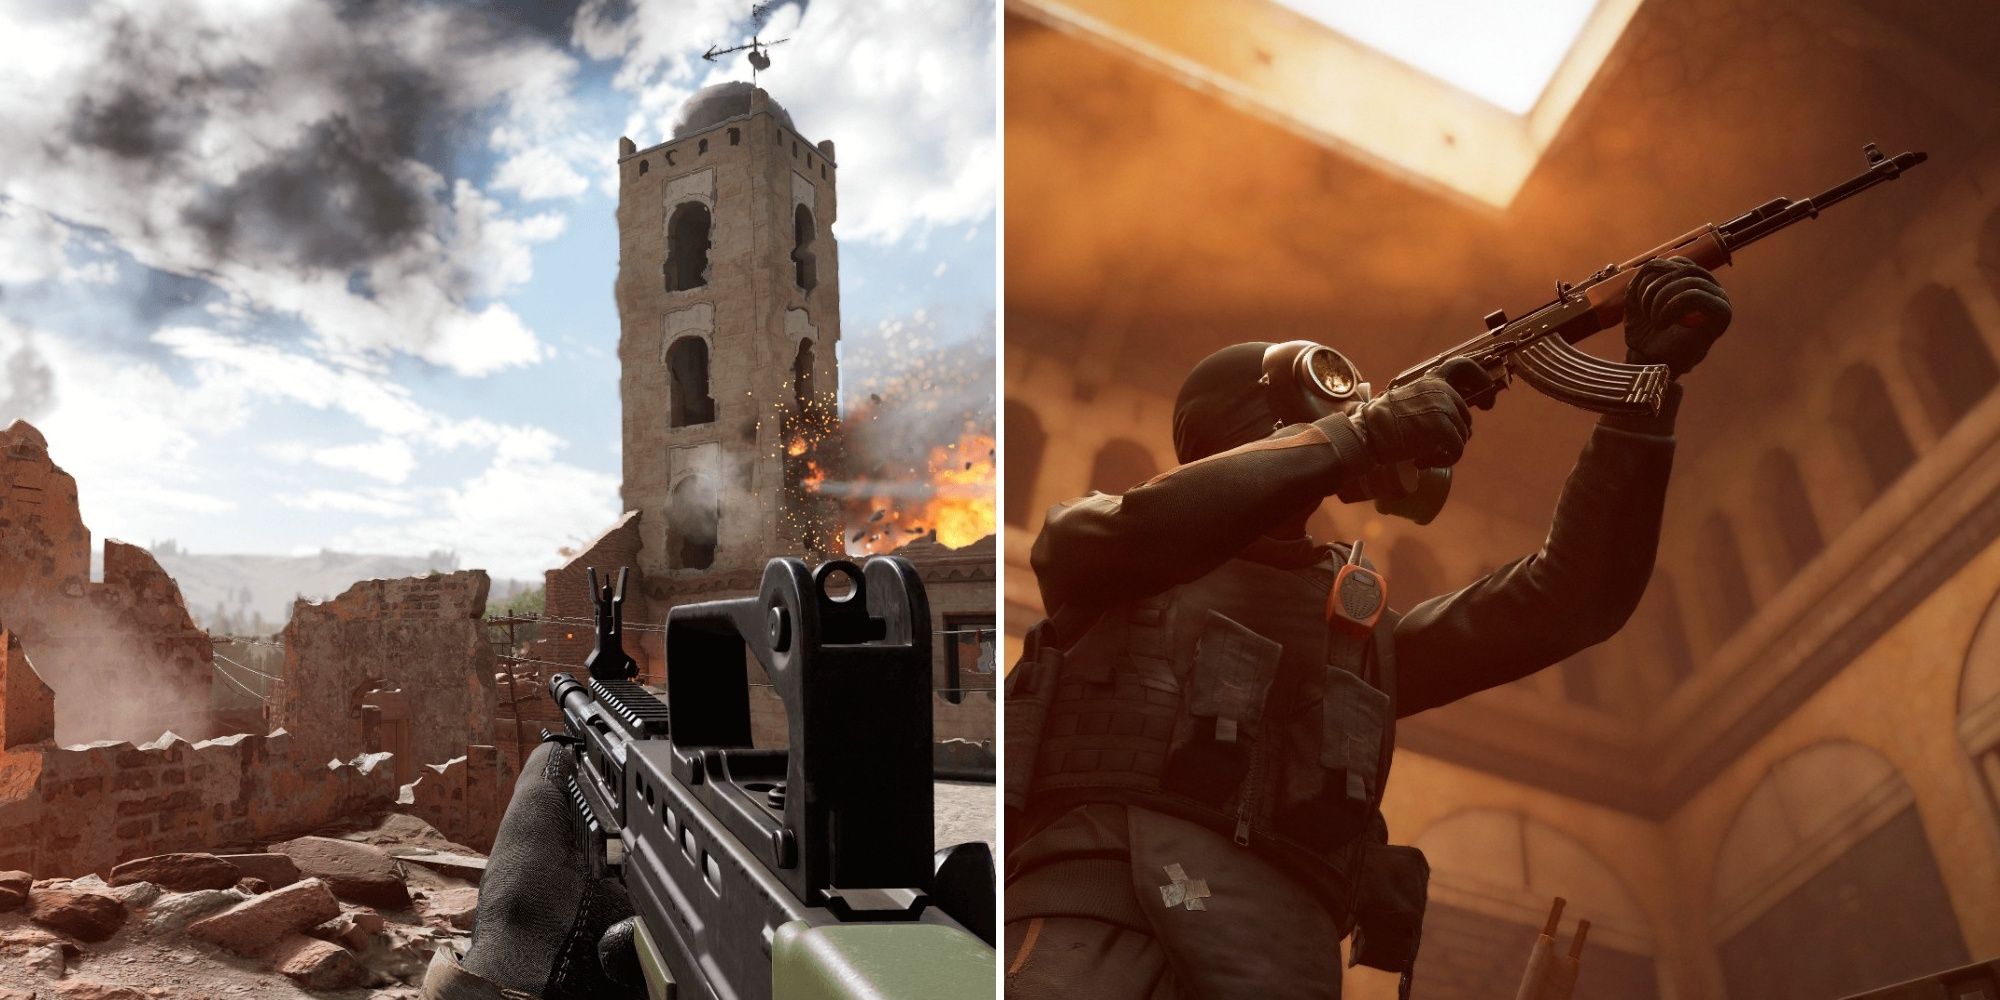 Insurgency: Sandstorm split image screenshots first person view of ruined town and third person view of soldier with weapon.